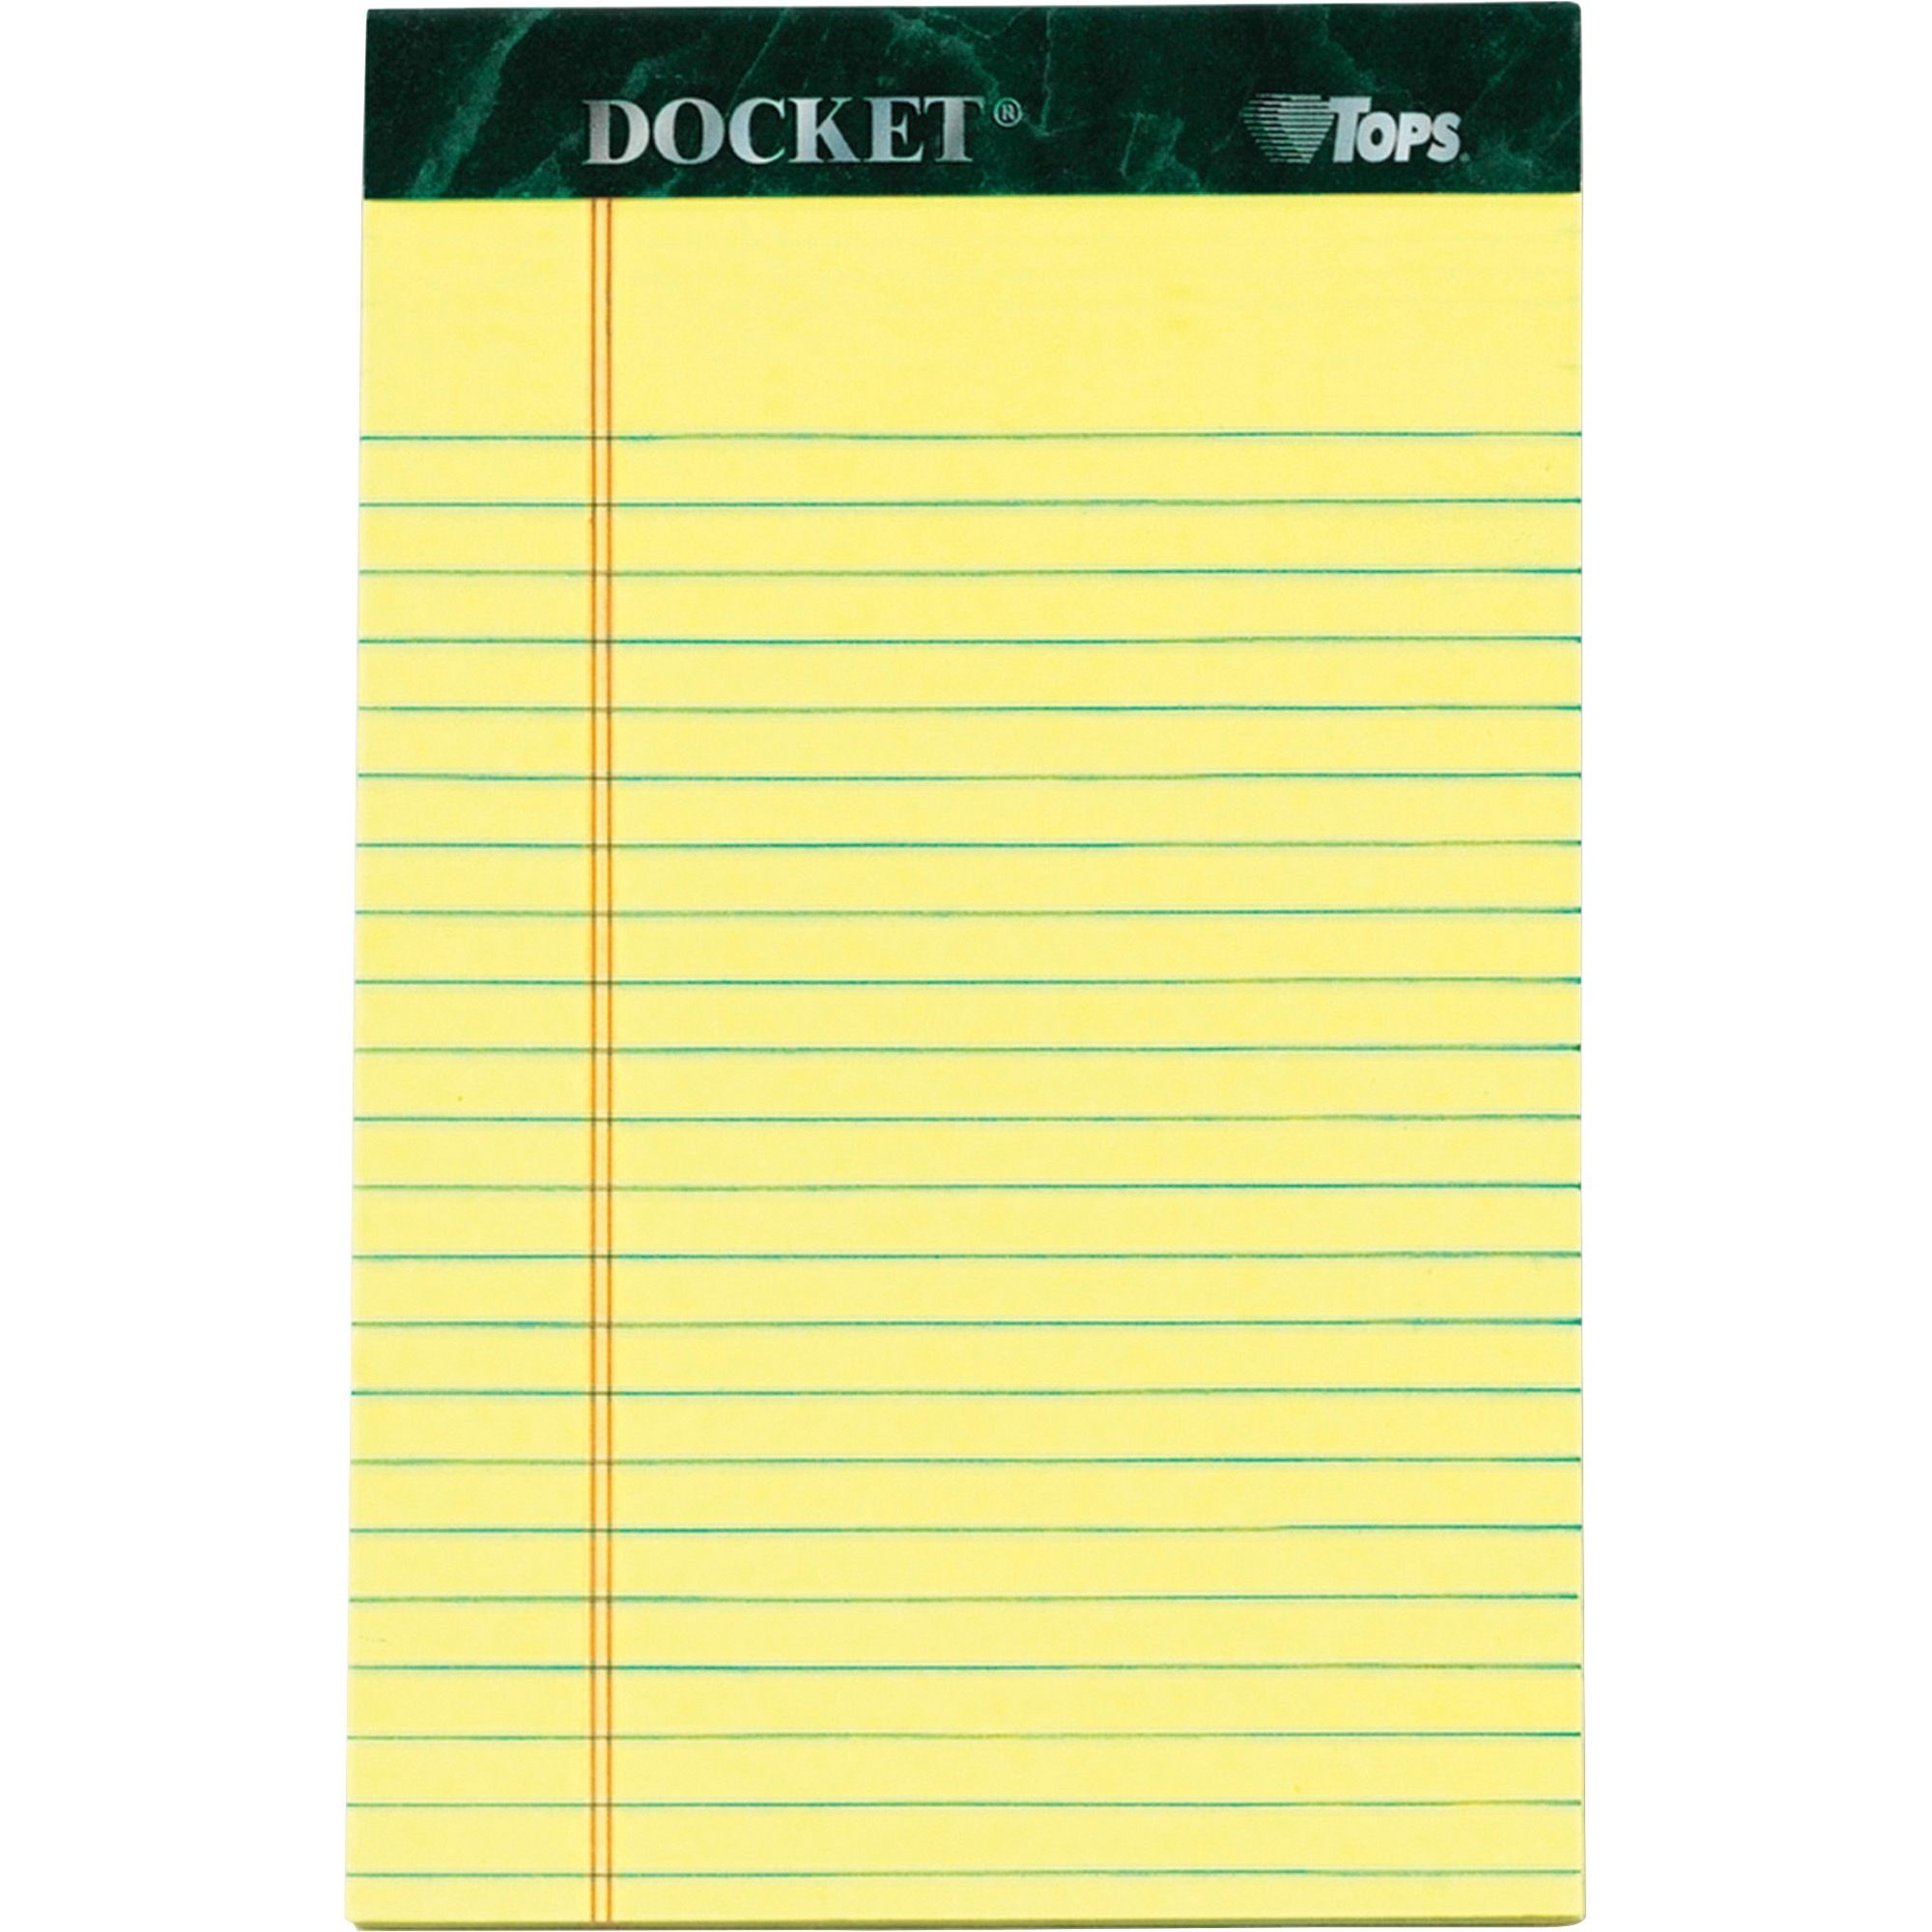 TOPS Jr. Legal Rule Docket Writing Pads - 50 Sheets - Double Stitched - 0.28" Ruled - 16 lb Basis Weight - Jr.Legal - 5" x 8" - 